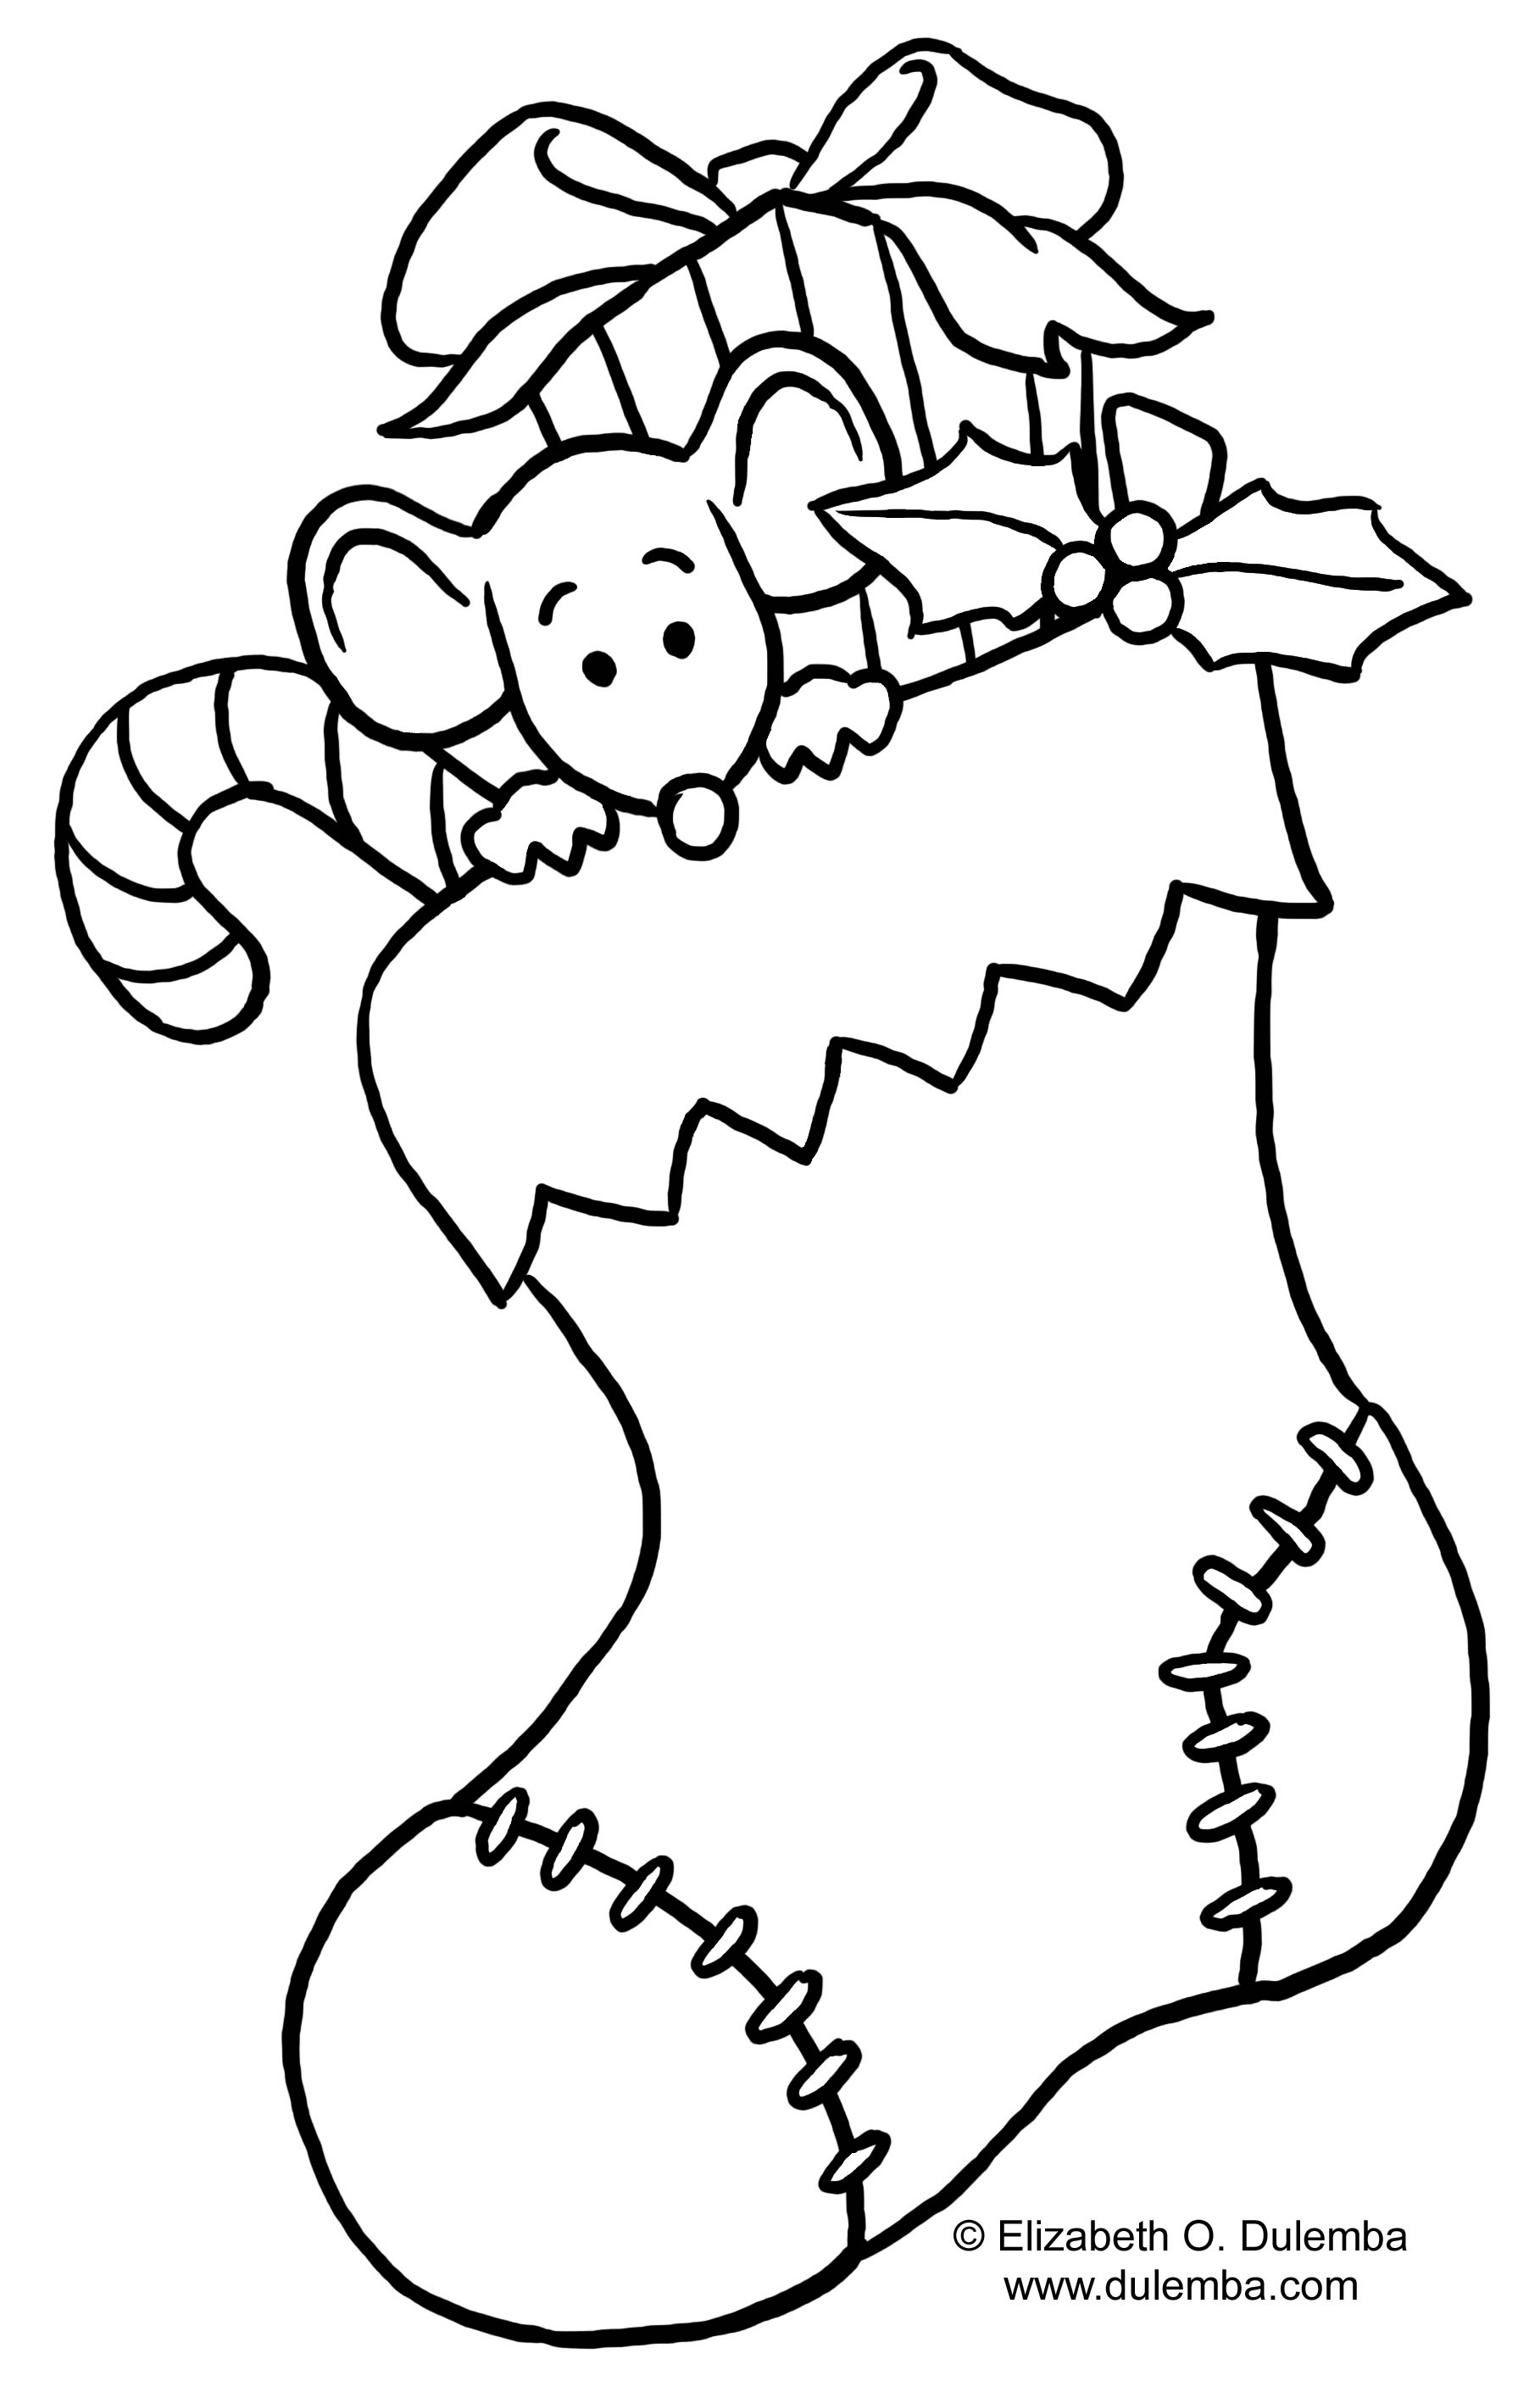 Children's Christmas Coloring Pages Free Coloring Ideas Christmas Coloring Pages Forittle Kids Printable